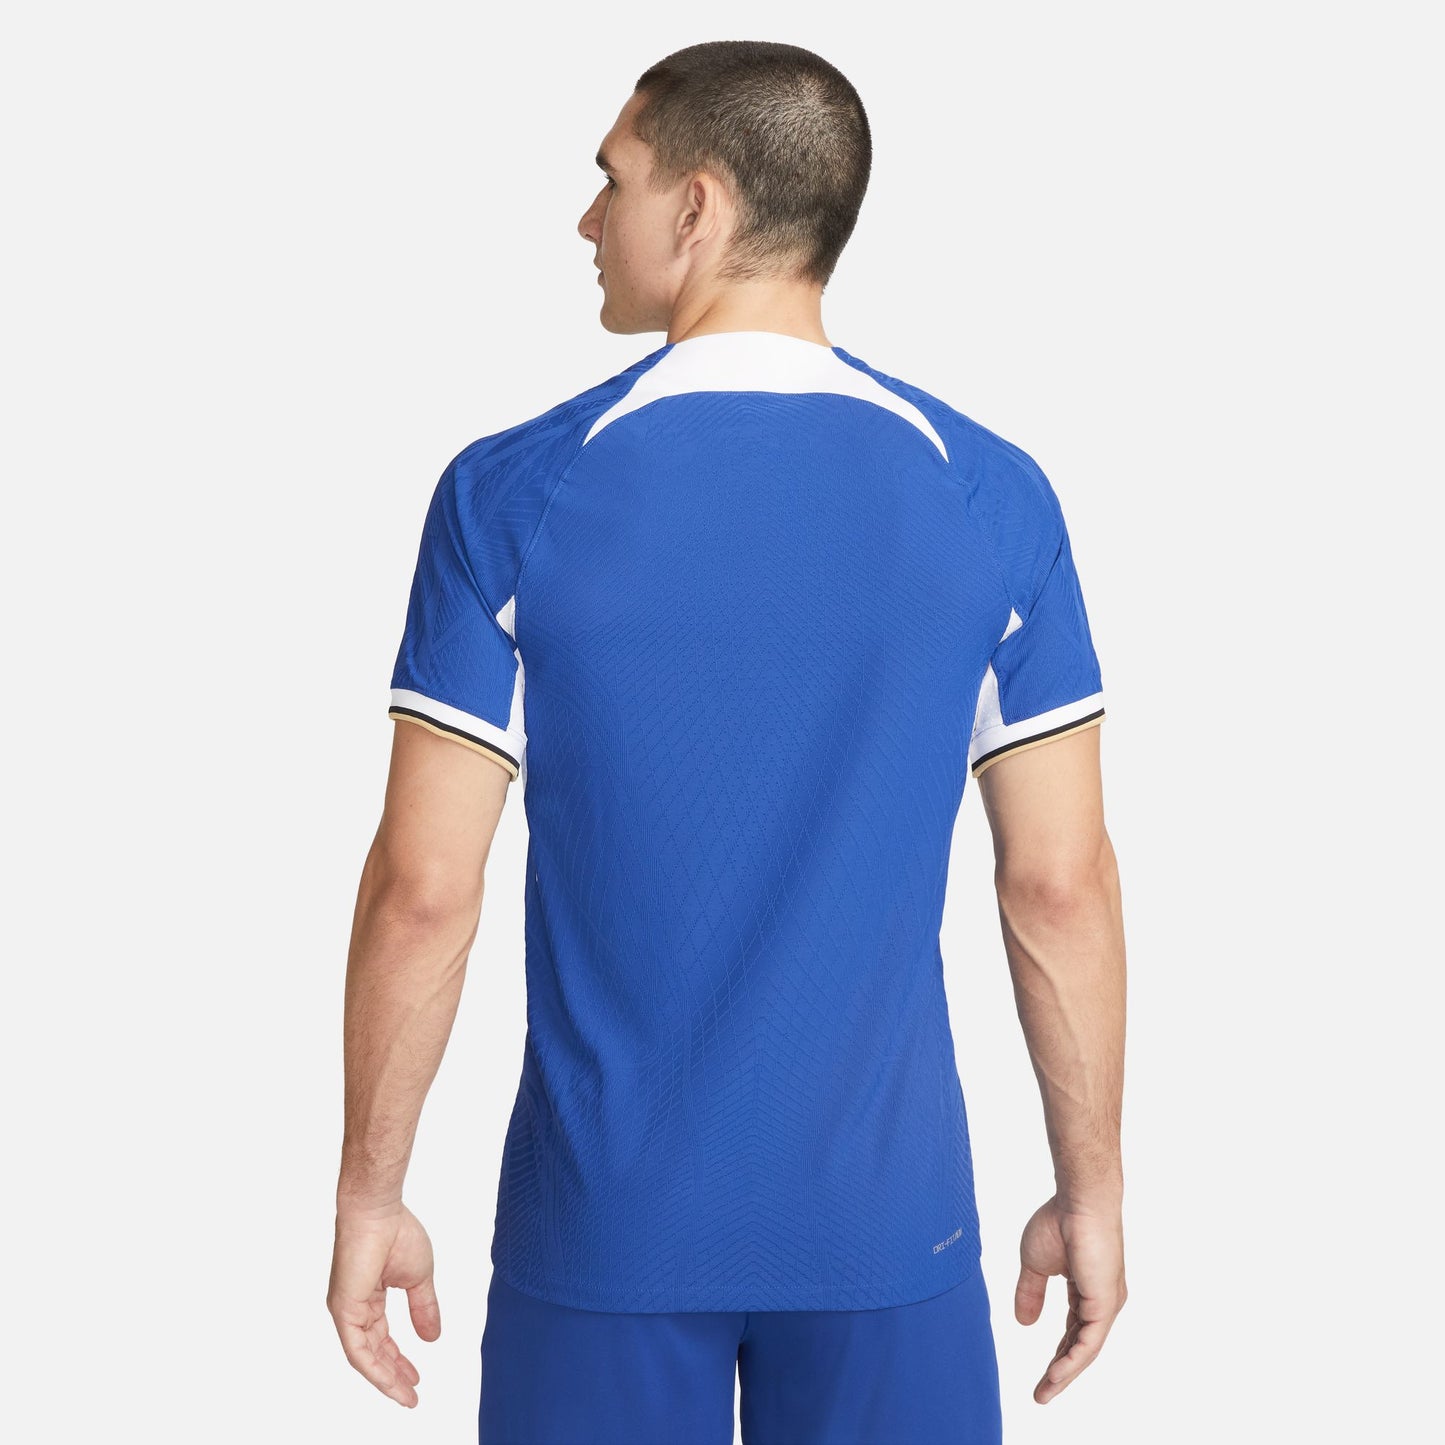 Chelsea Home 23/34 Straight Fit Nike Match Shirt